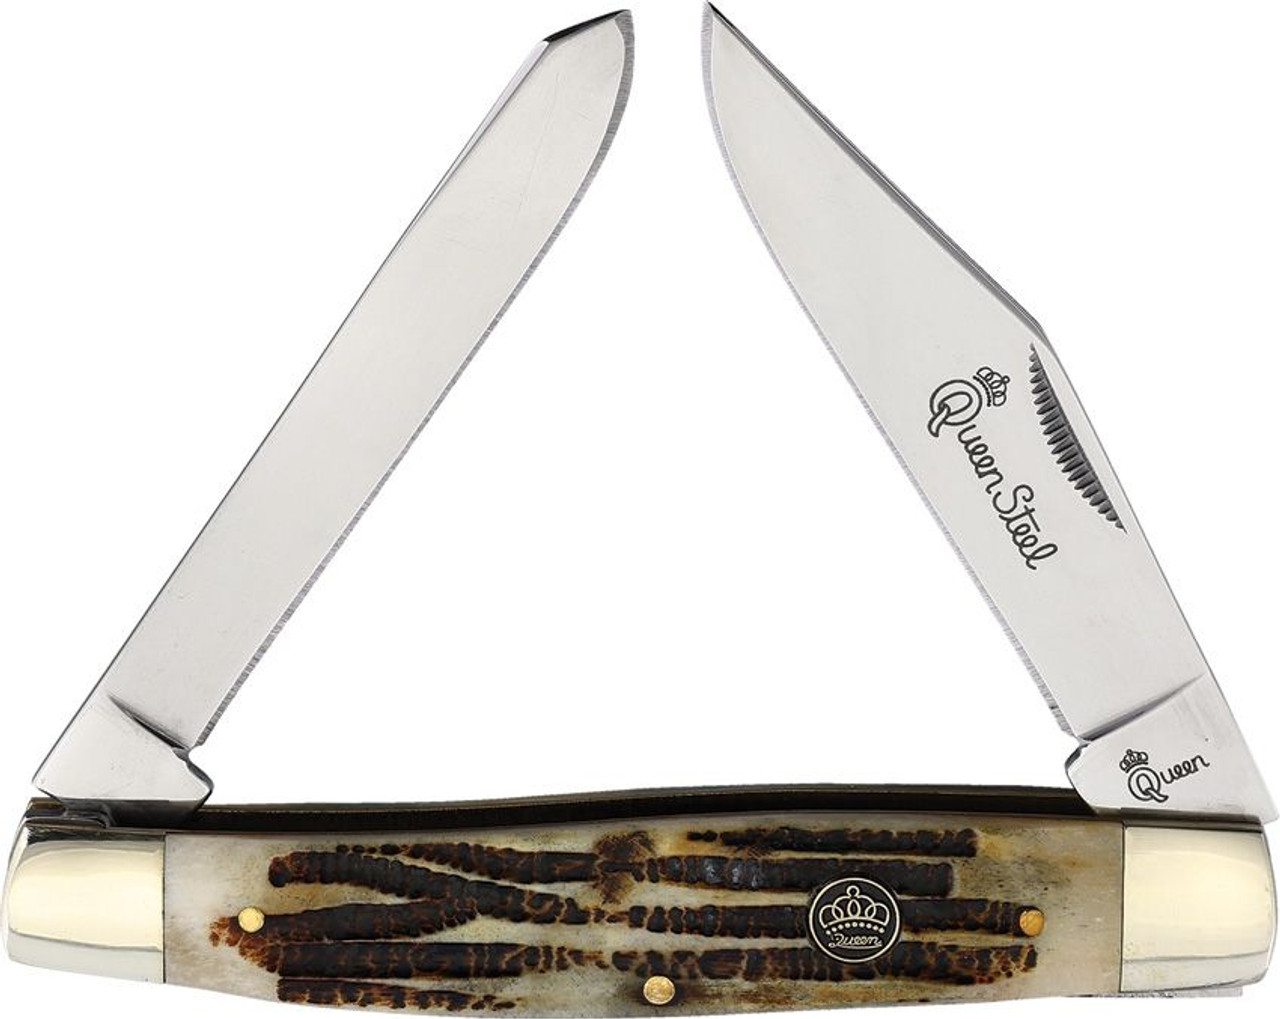 Queen Cutlery Moose (QN52WB) - 440C Stainless Steel Clip and Spey Blades, Winterbottom Jigged Bone Handle